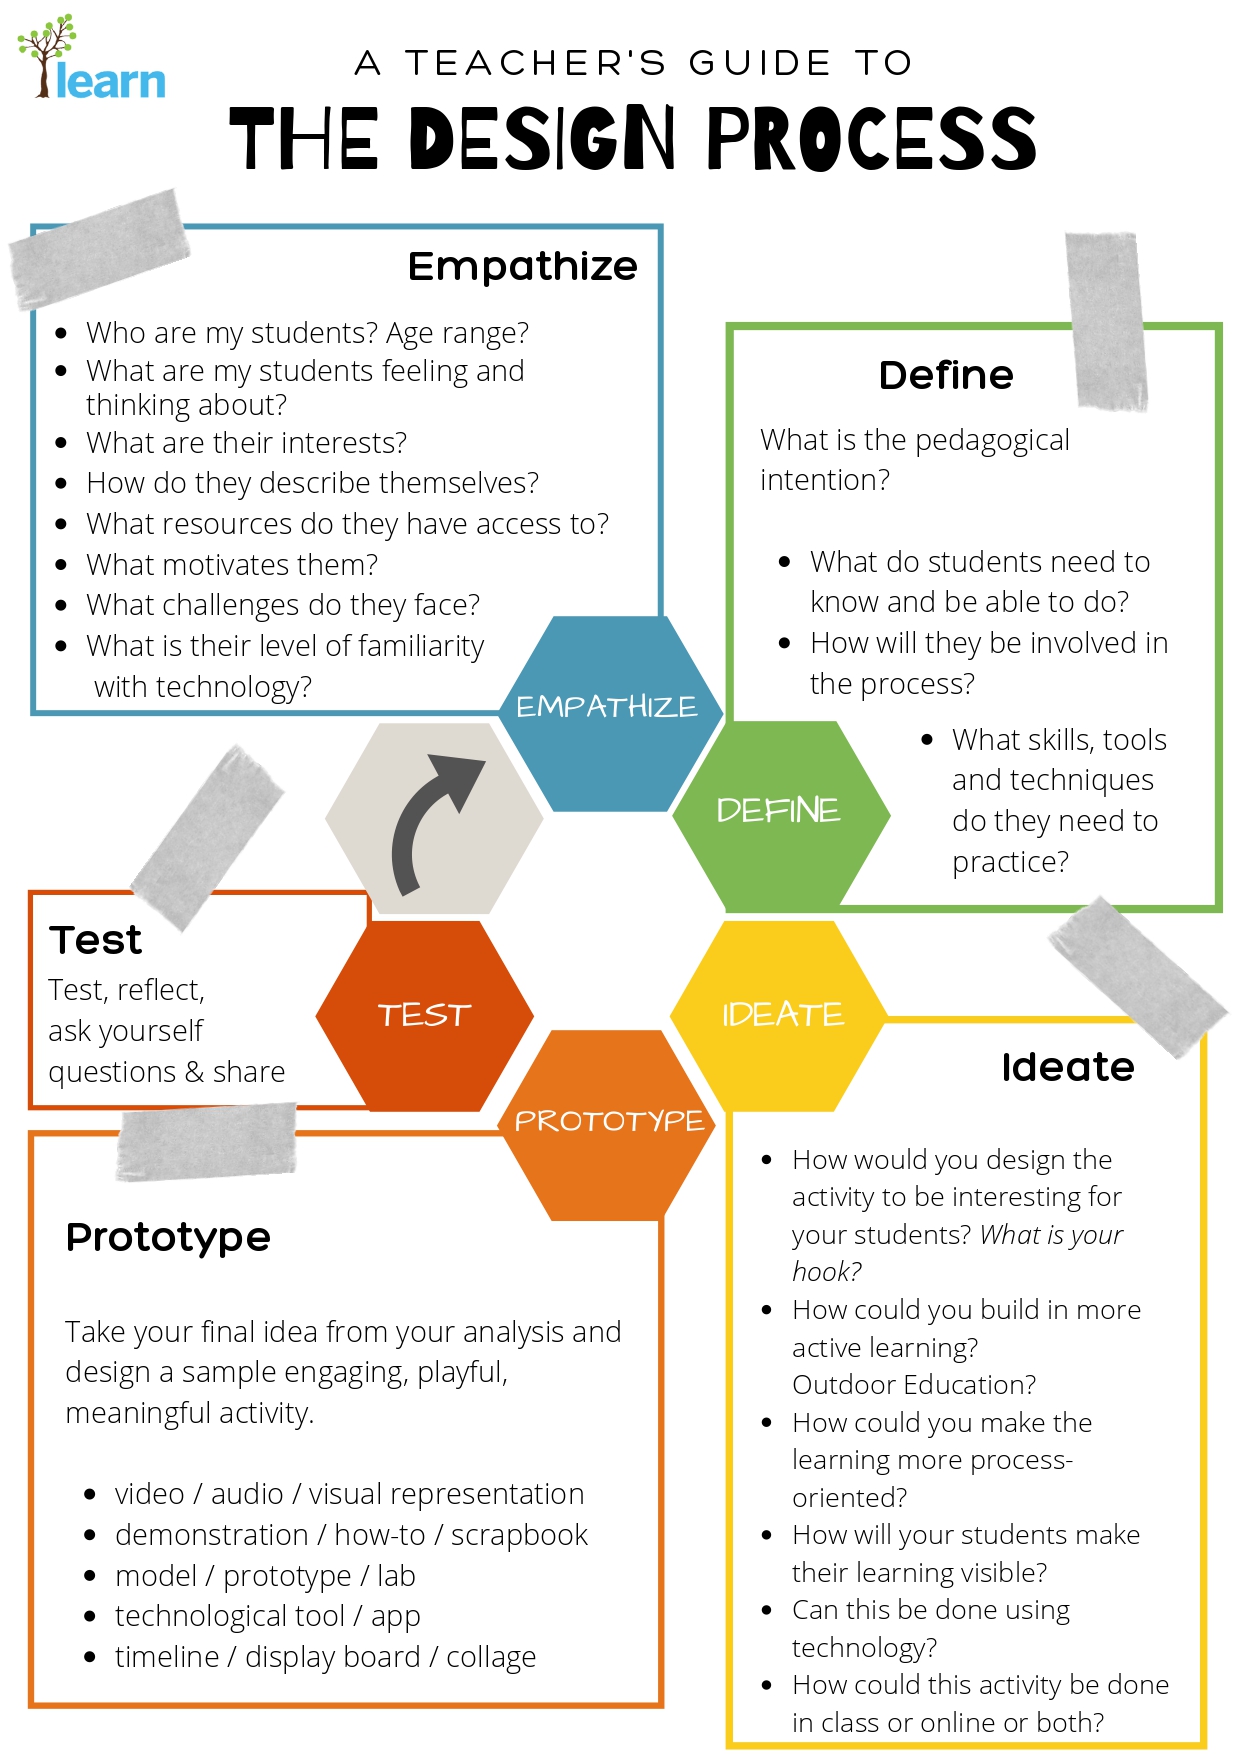 The Design Process – Digital Competency in Action